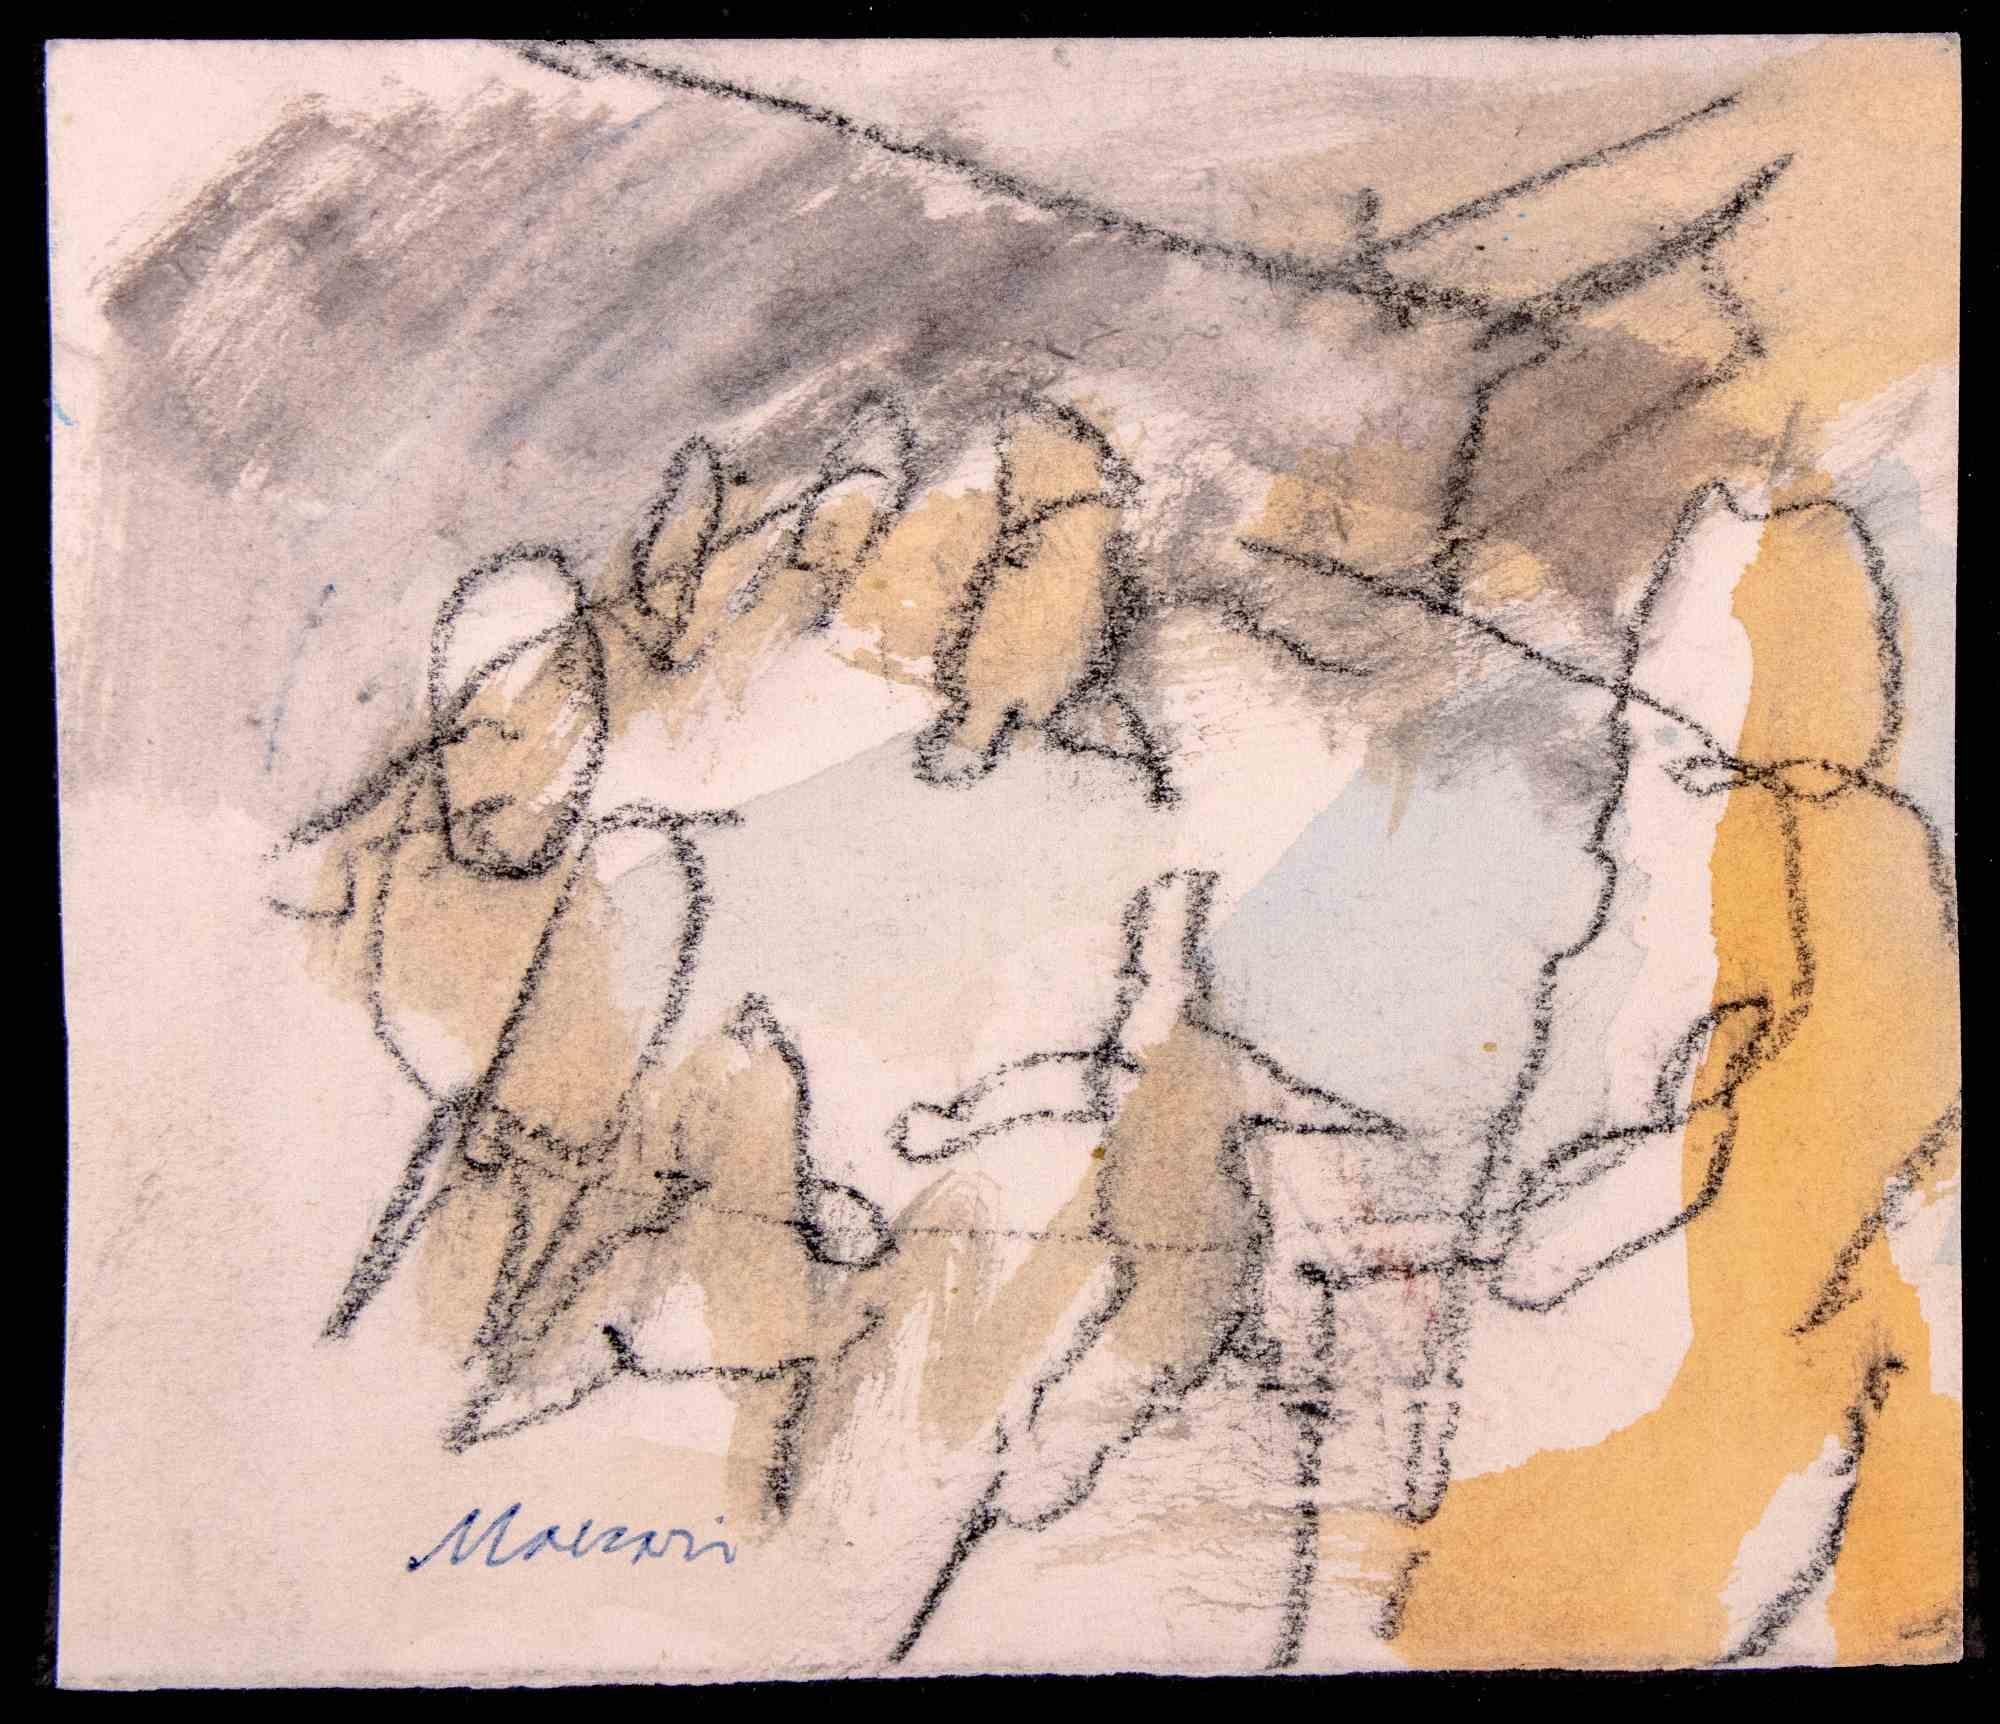 Figures - Pencil Drawing and Watercolour by Mino Maccari - 1980s